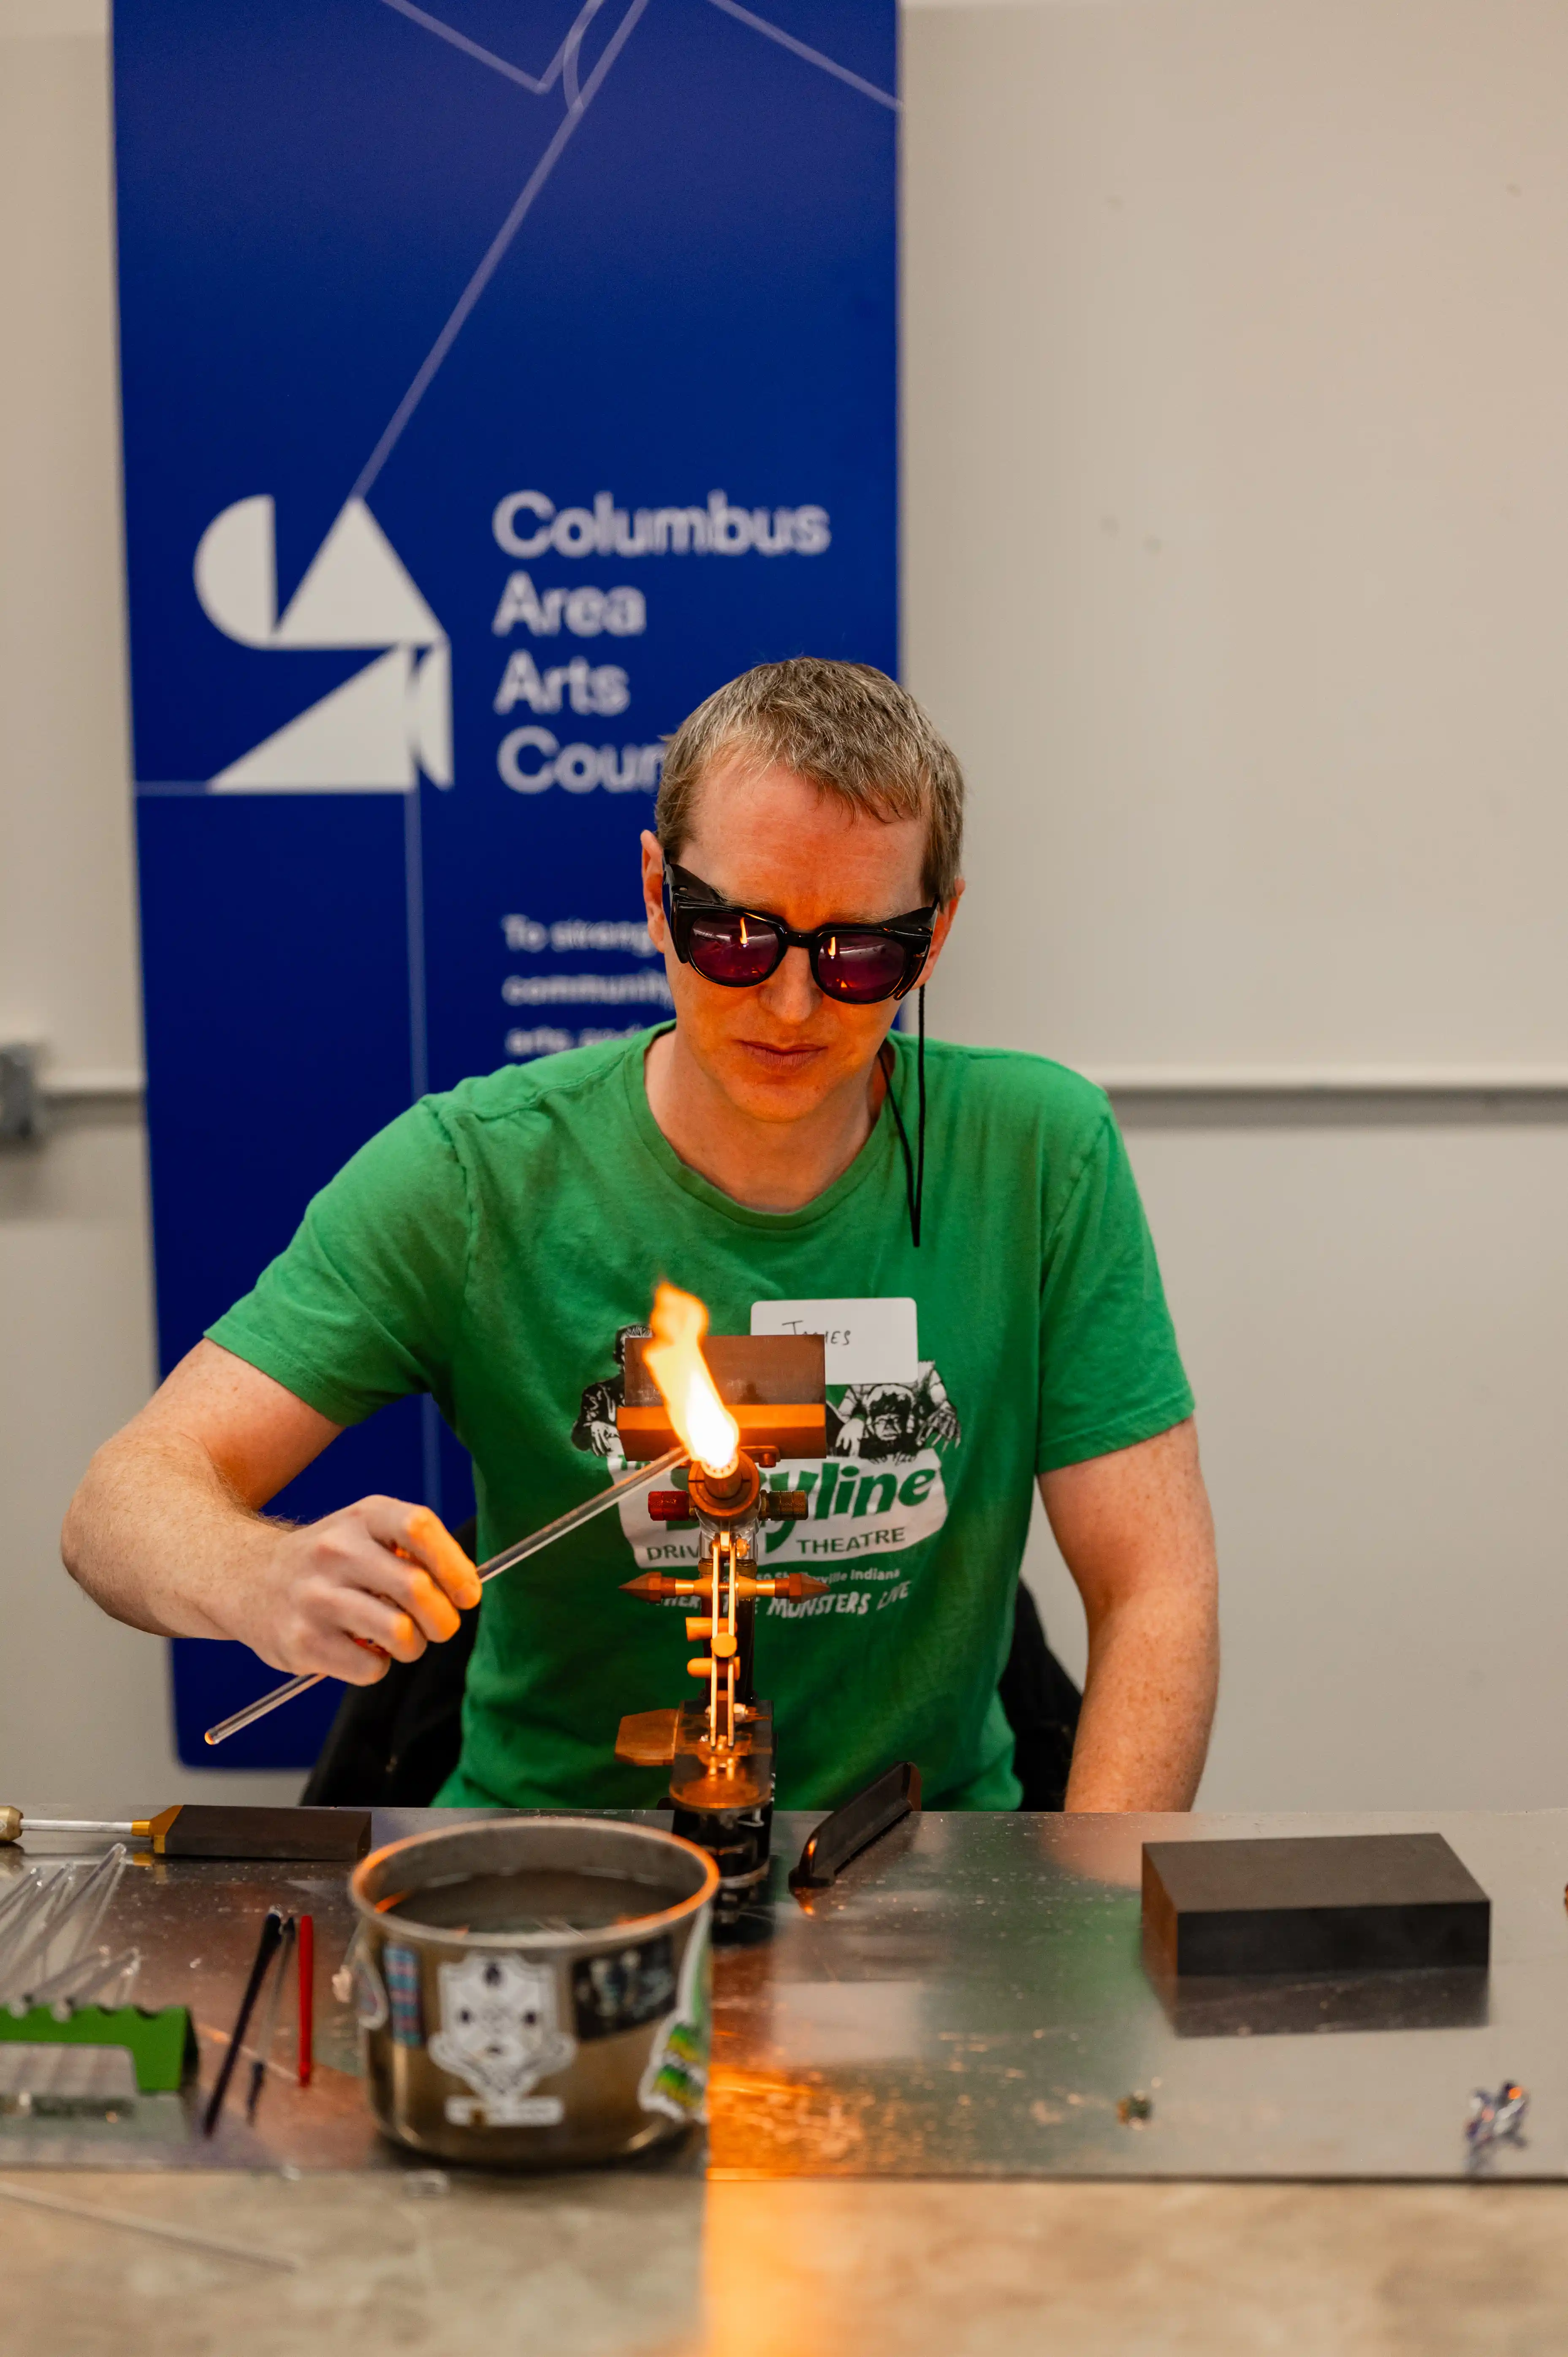 Person wearing protective glasses working with a glass blowing torch at a workshop table with various tools.